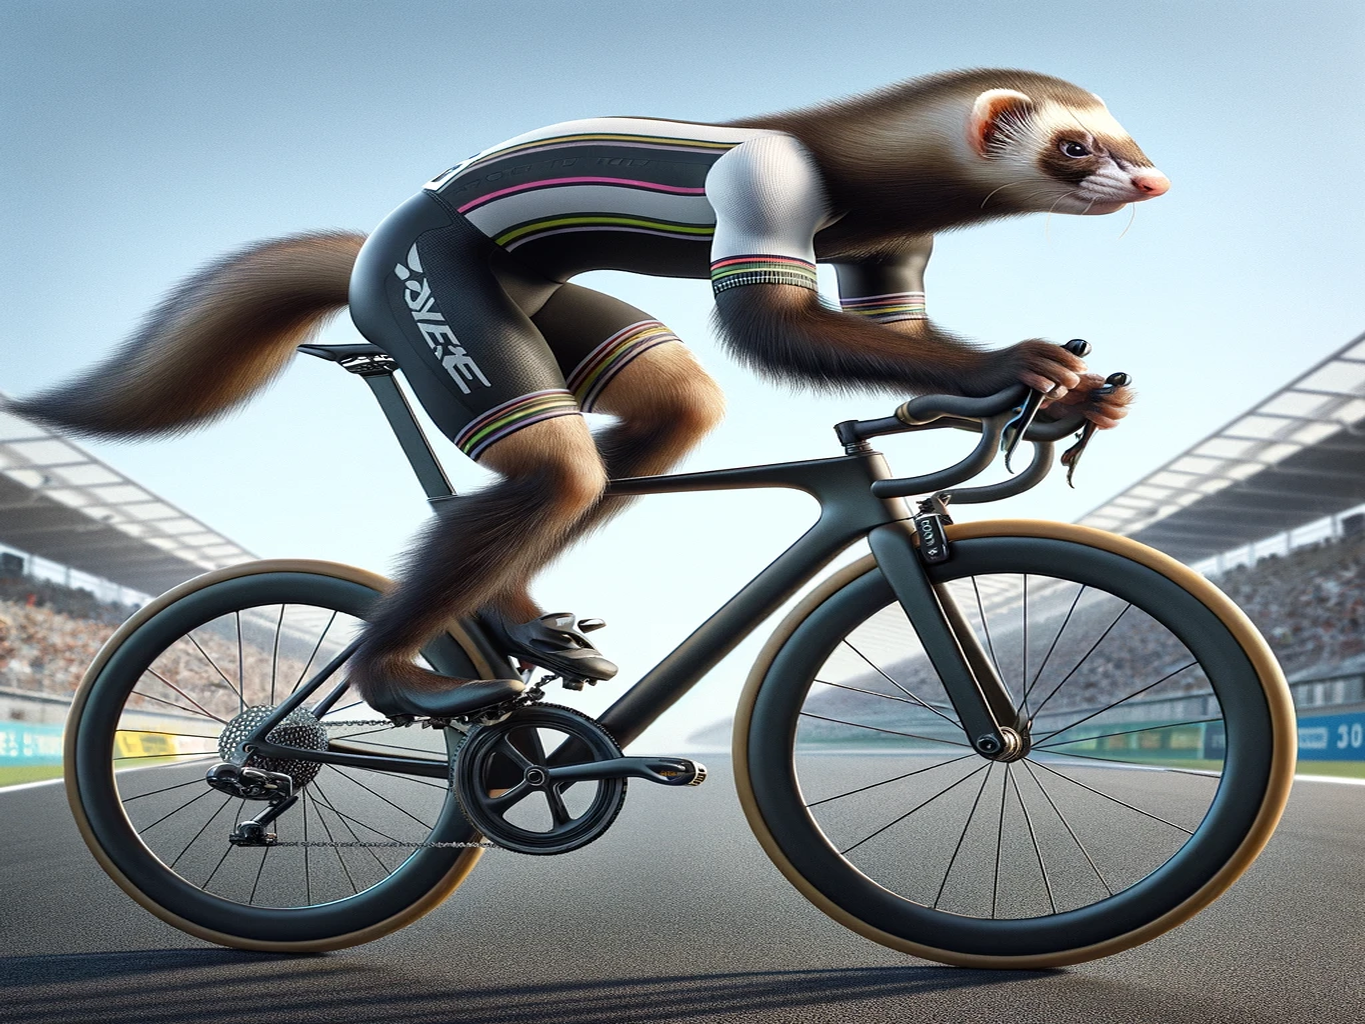 StreetFerret for Cycling